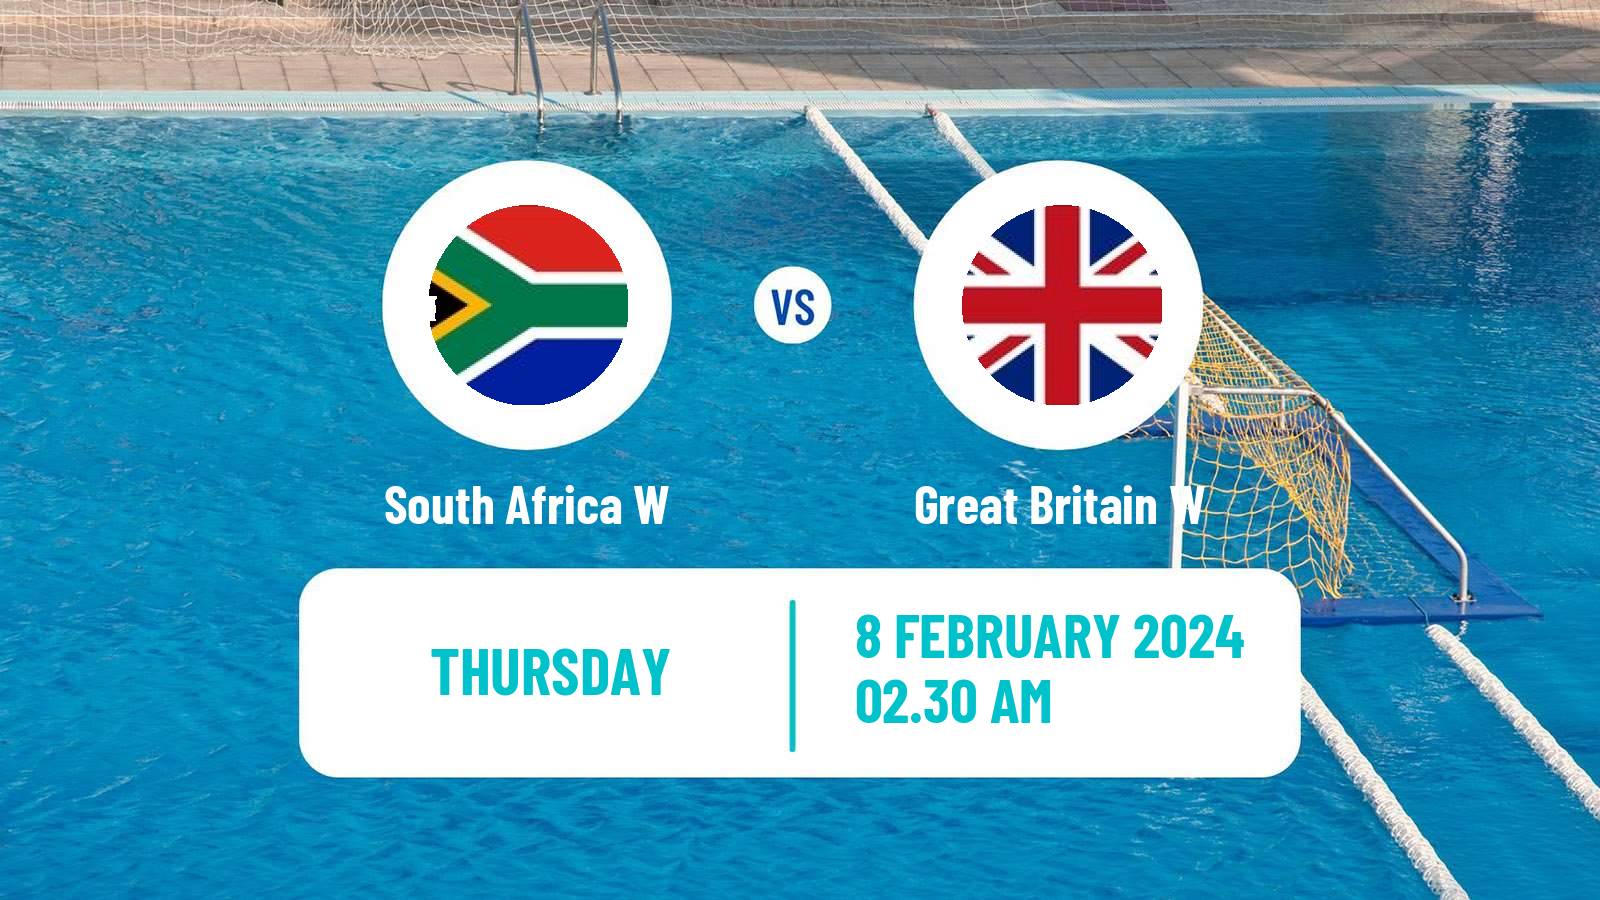 Water polo World Championship Water Polo Women South Africa W - Great Britain W